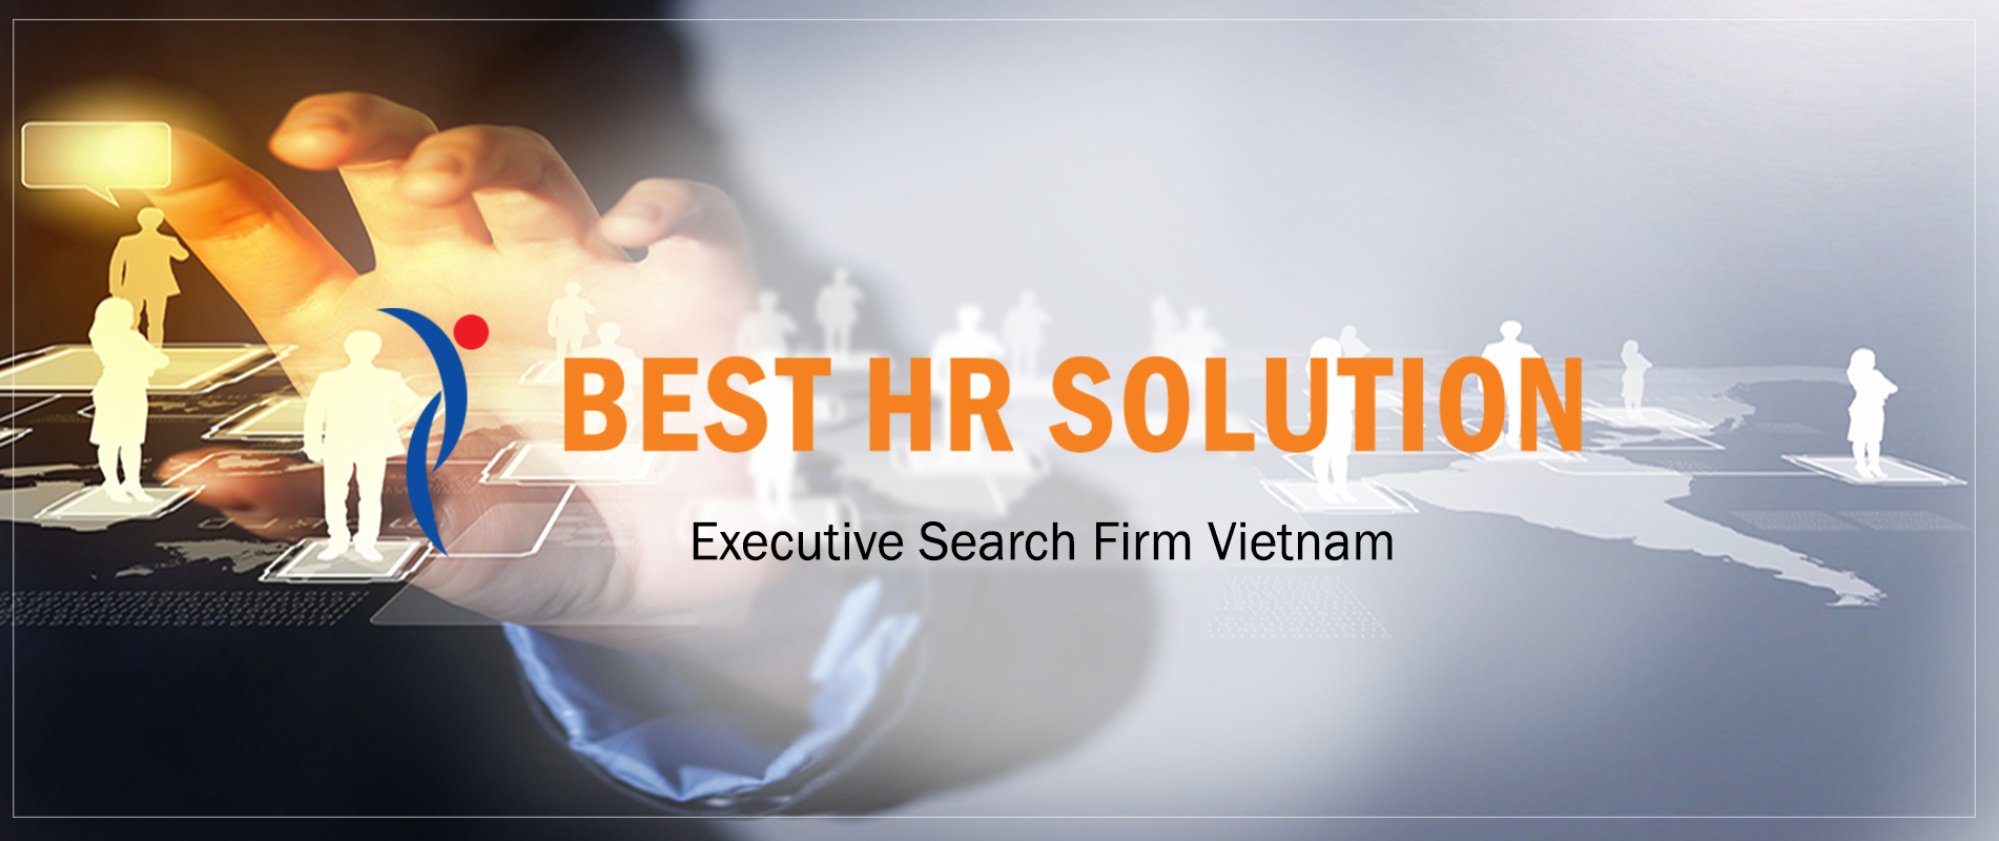 Best HR Solution - Best HR Solution Company Limited 